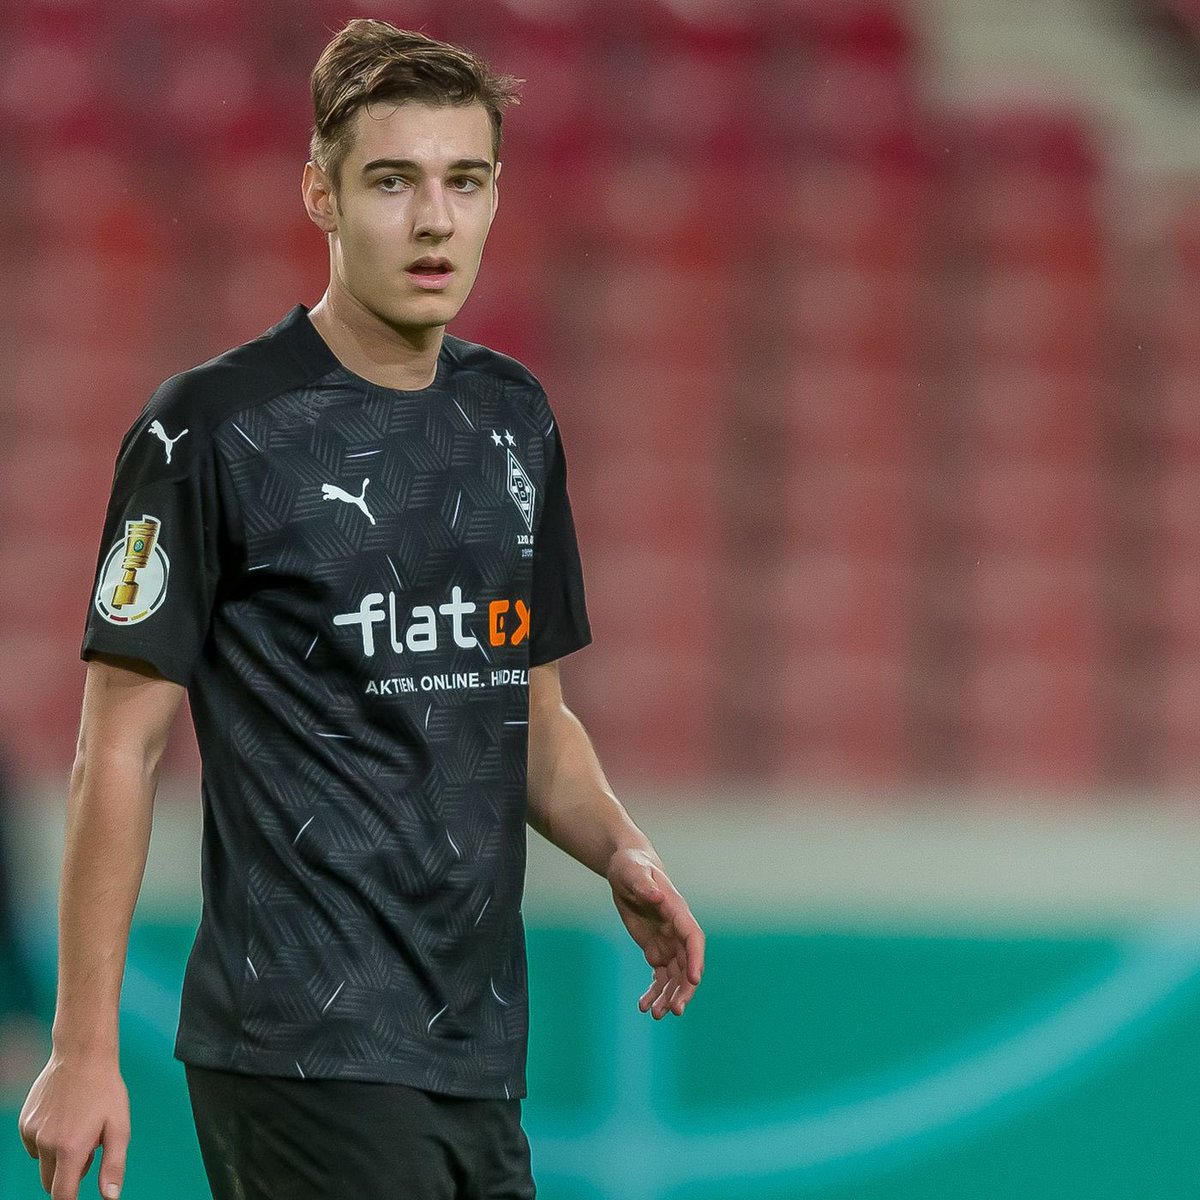 (15) It’s more difficult looking for a realistic Pogba replacement considering we haven’t been linked to many midfielders at all. But Monchengladbach’s Florian Neuhaus is an example of a player who could play that role well. We should pursue other options too of course.